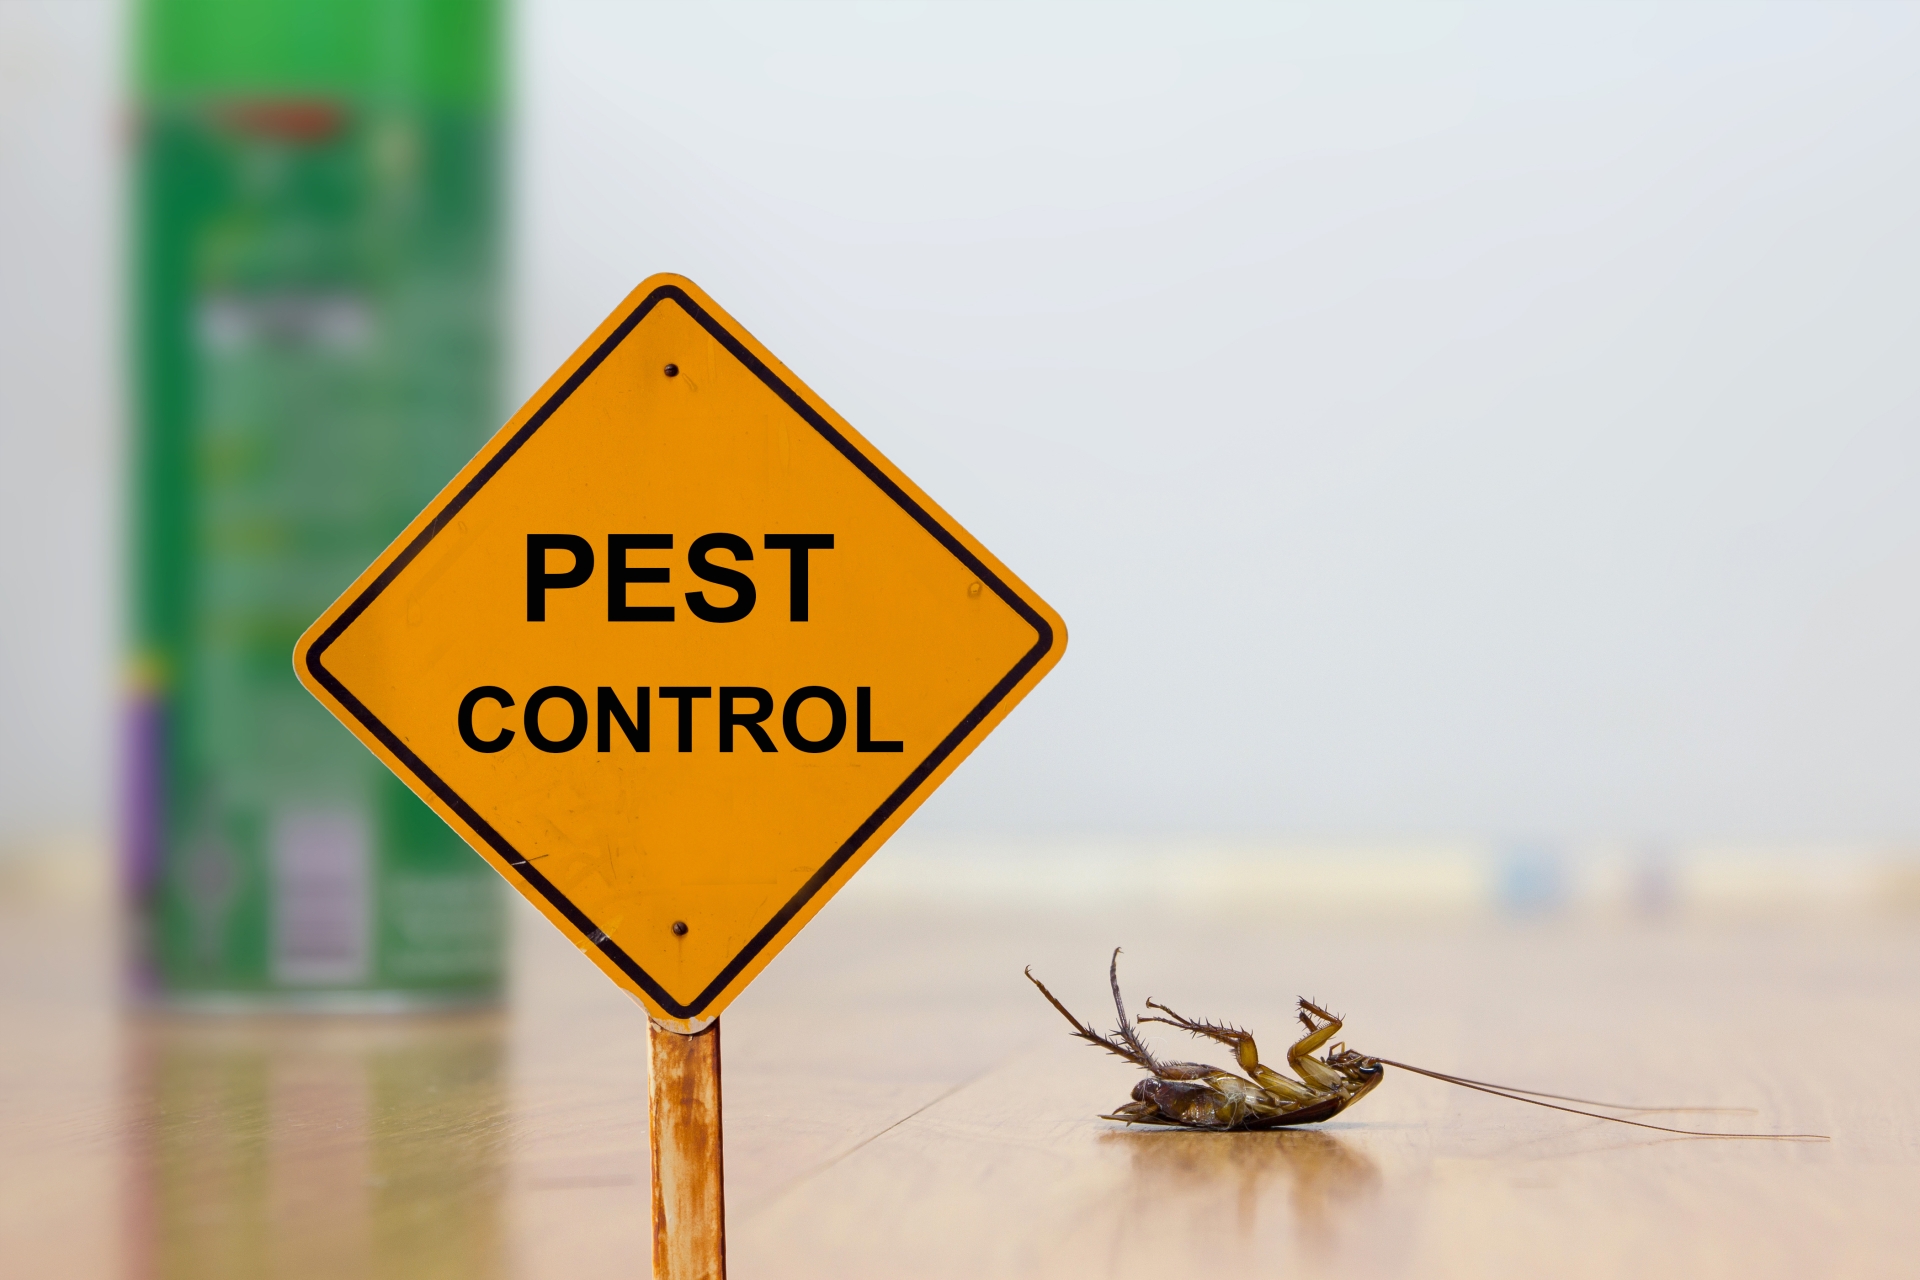 24 Hour Pest Control, Pest Control in Kensal Green, NW10. Call Now 020 8166 9746